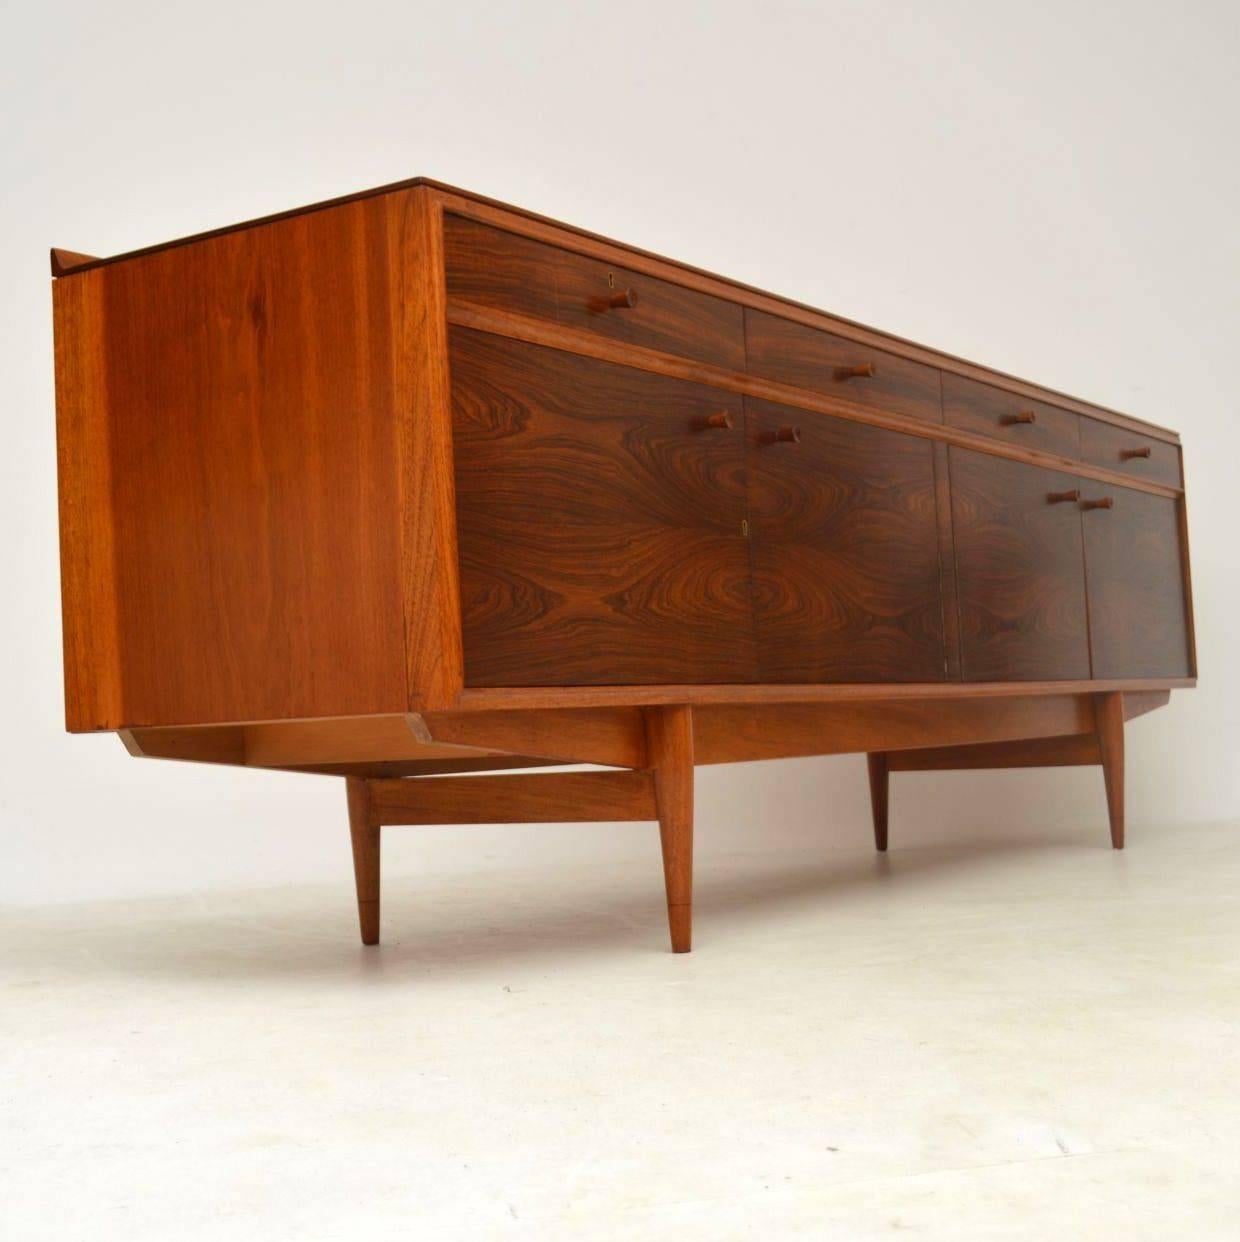 A stunning and very rare vintage sideboard designed by Robert Heritage and made by Archie Shine, this dates from the 1960’s. The top and sides are Mahogany,  we have had this stripped and re-polished to a very high standard, the condition is superb